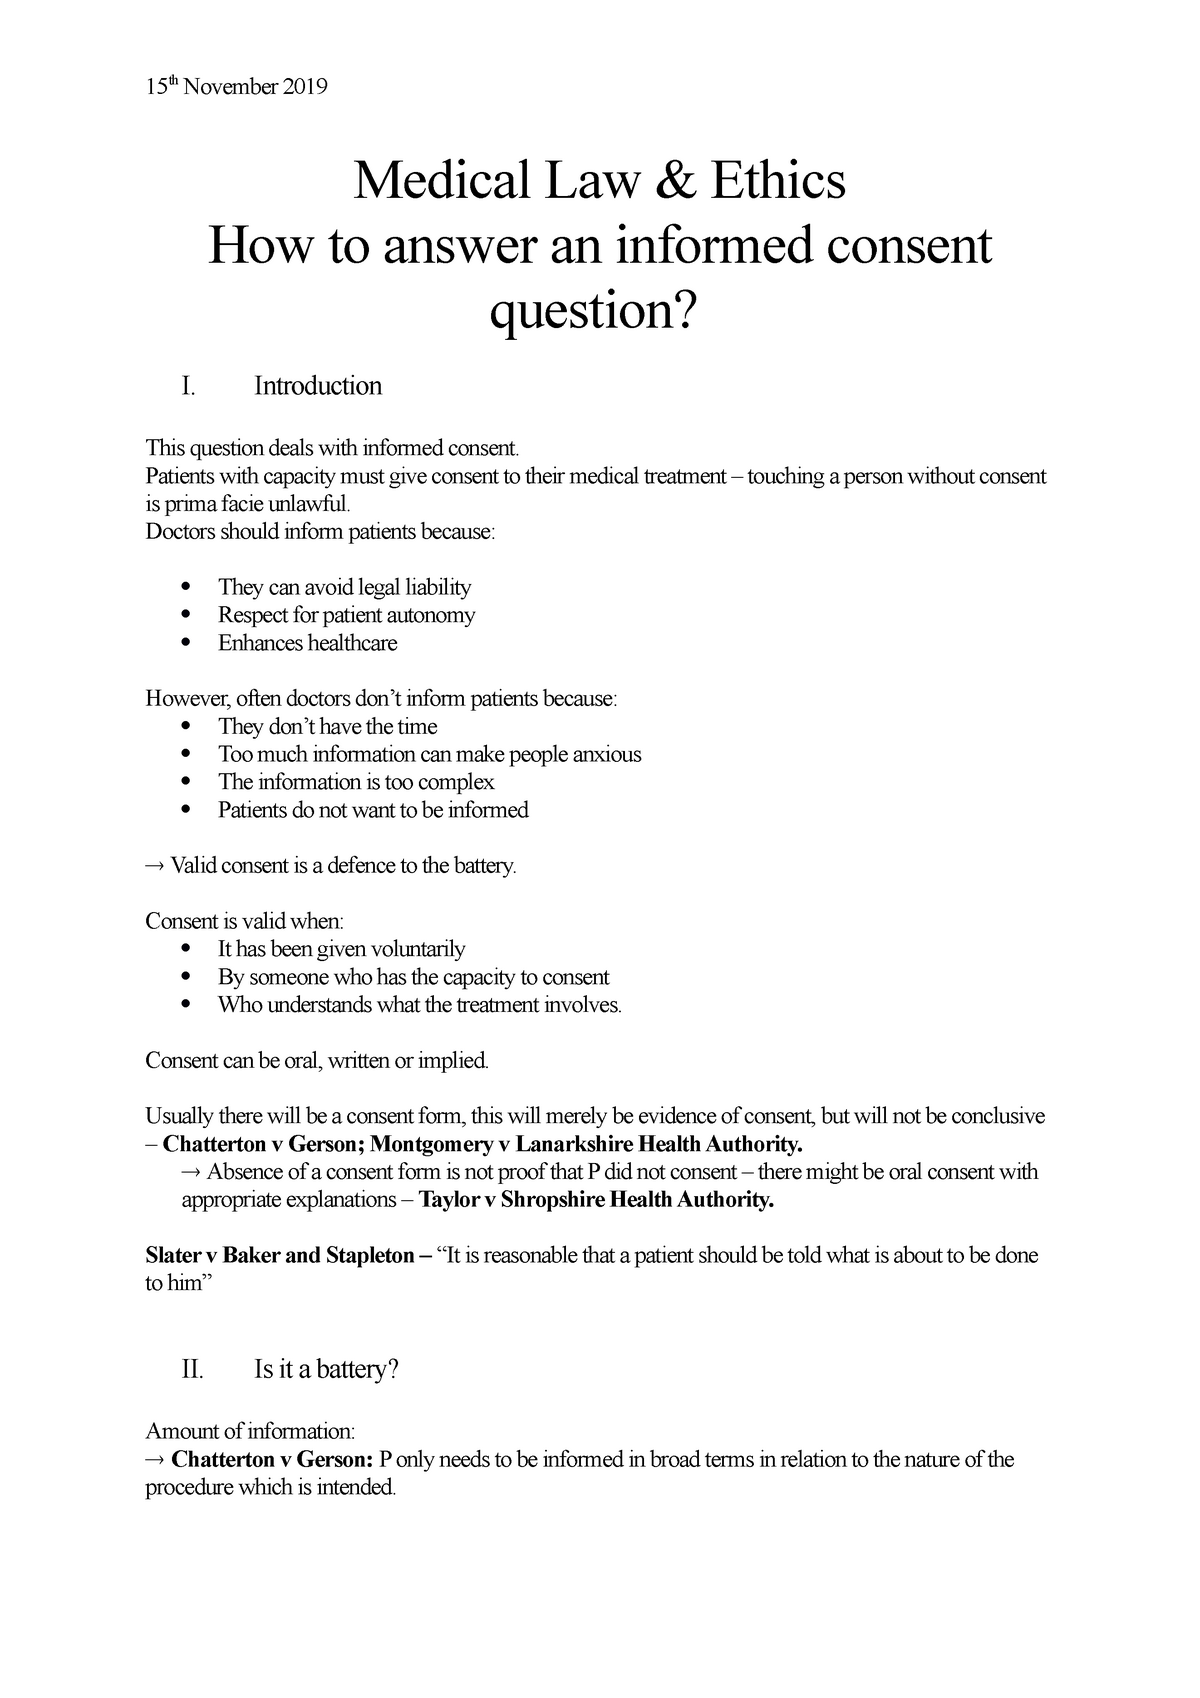 Medical Law & Ethics How to answer an informed consent question